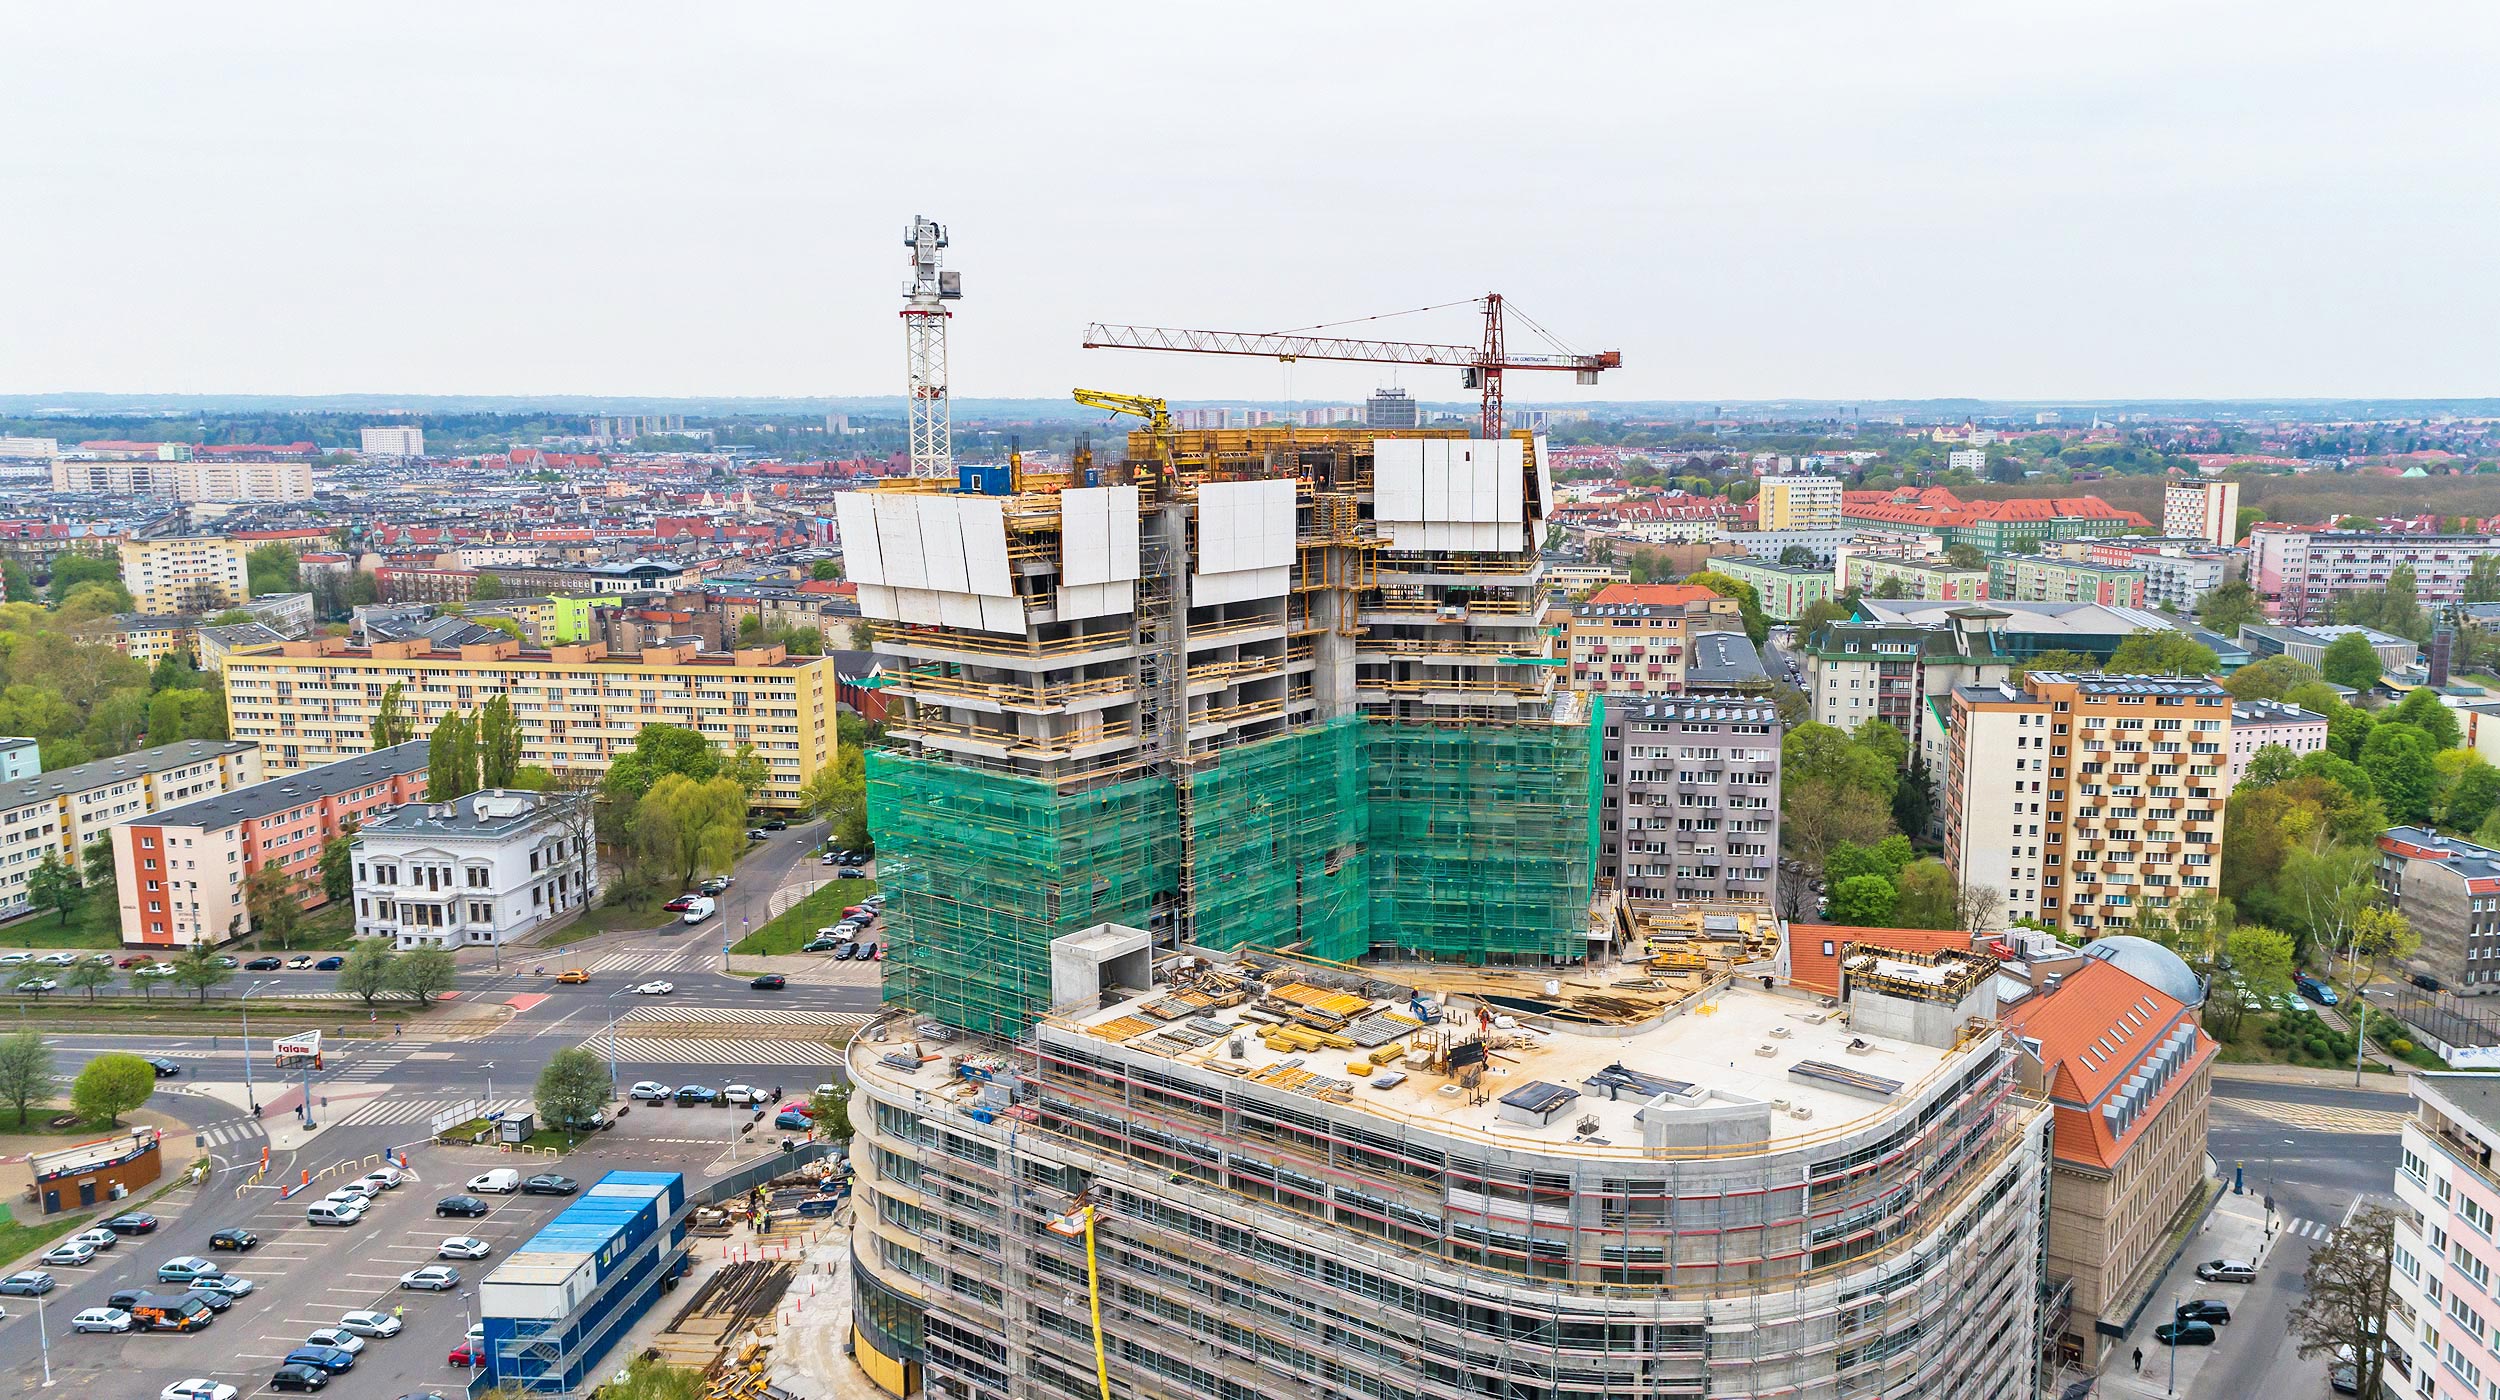 The Hanza Tower, located in the centre of Szczezin, Poland, will be one of the tallest buildings in the area drawn between the cities of Berlin, Gdansk, Gdynia, and Sopot.